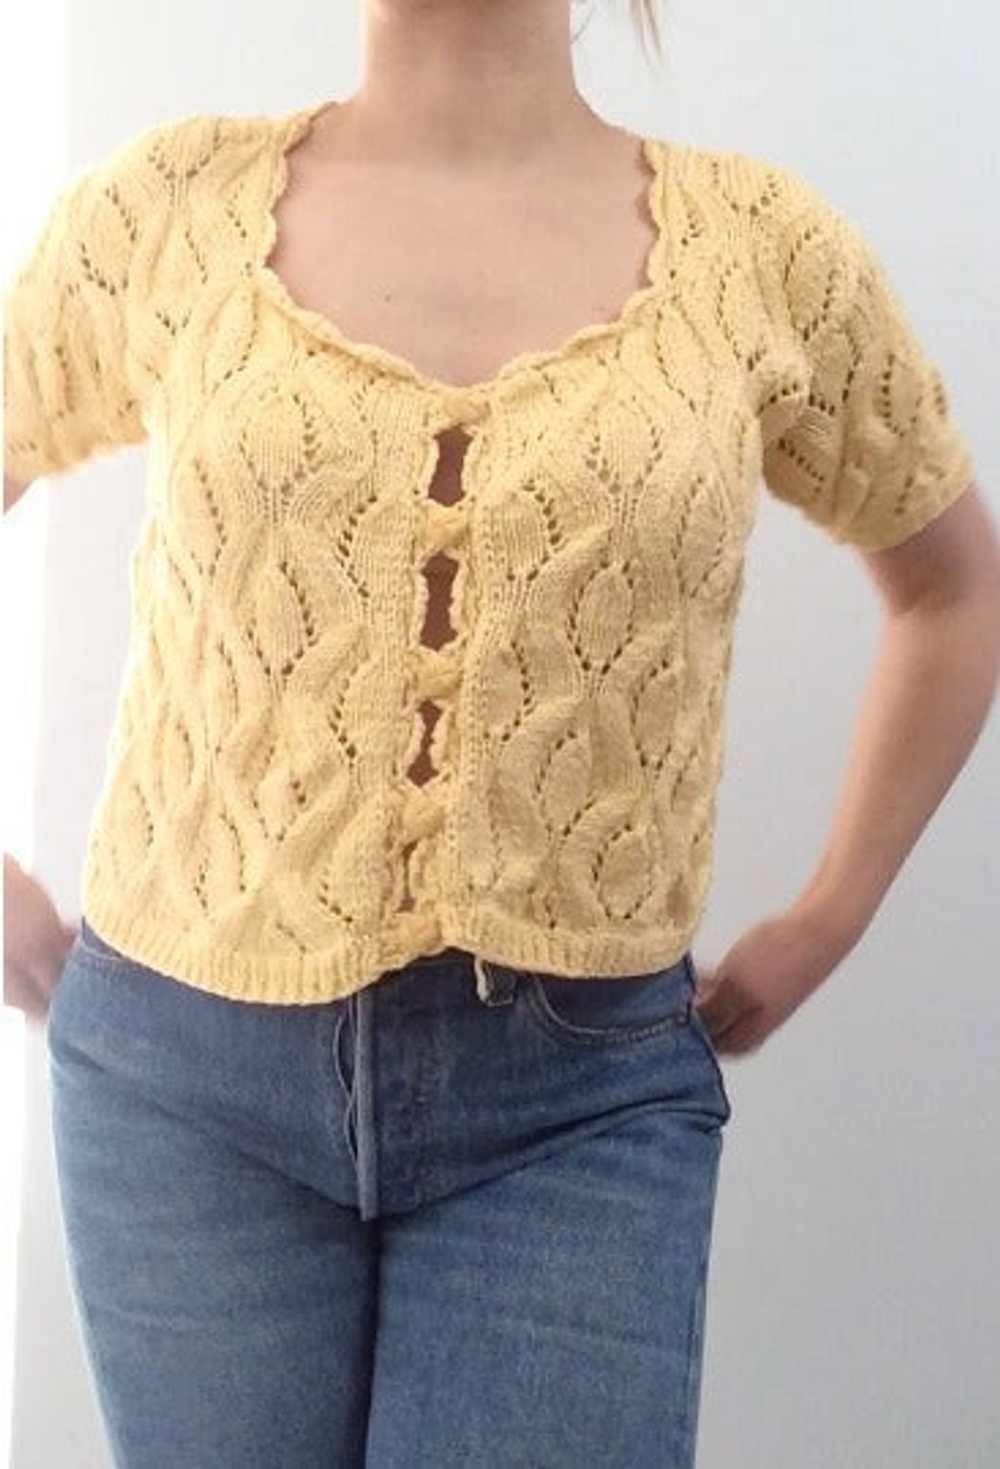 Knit top - Handmade yellow cotton knit with golde… - image 5